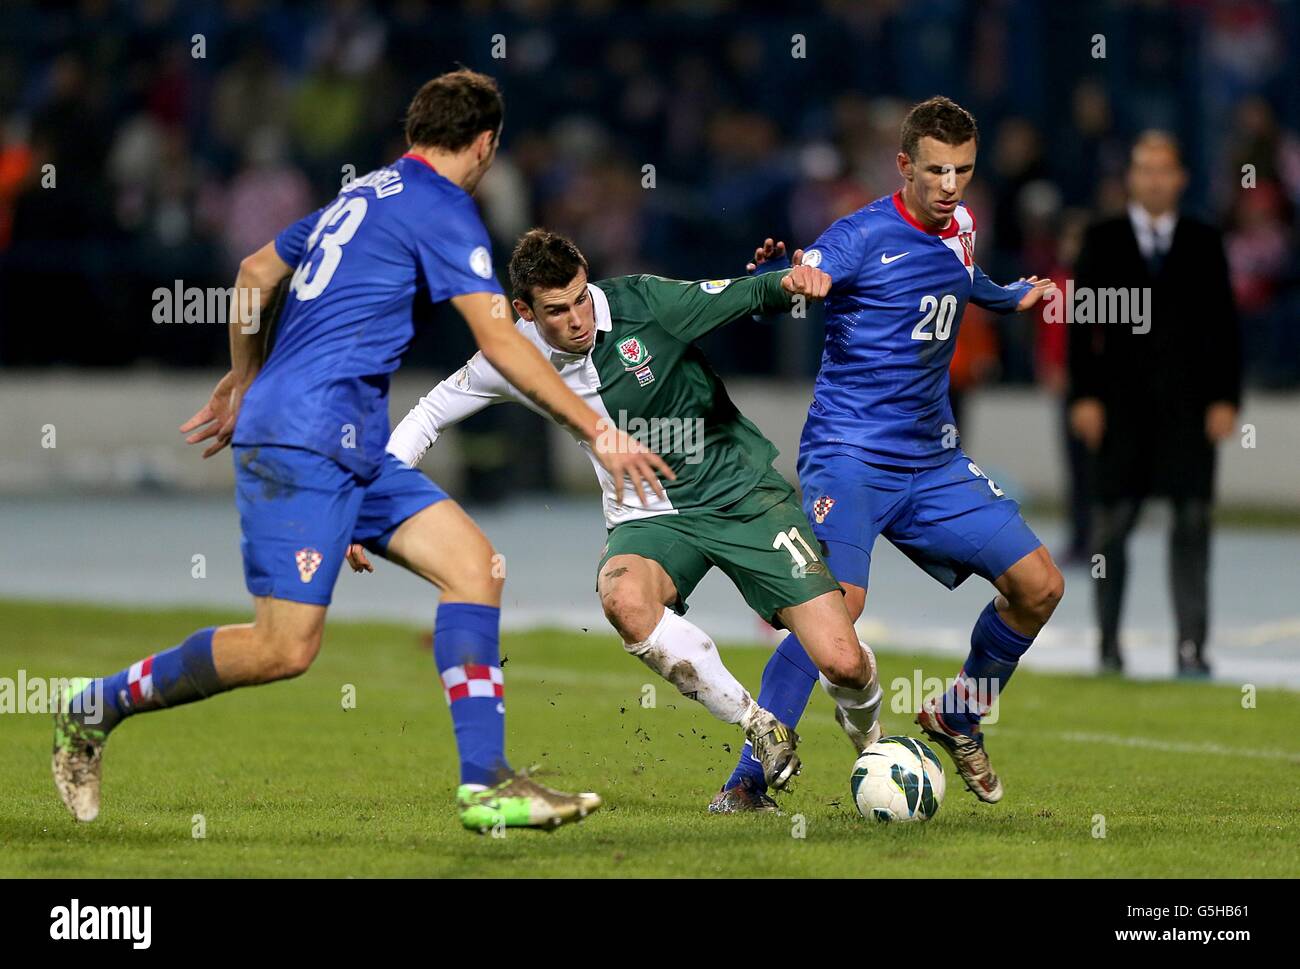 Soccer - 2014 FIFA World Cup - Qualifier - Group A - Croatia v Wales - Stadion Maksimir. Wales' Gareth Bale (centre) and Croatia's Ivan Perisic (right) in action Stock Photo